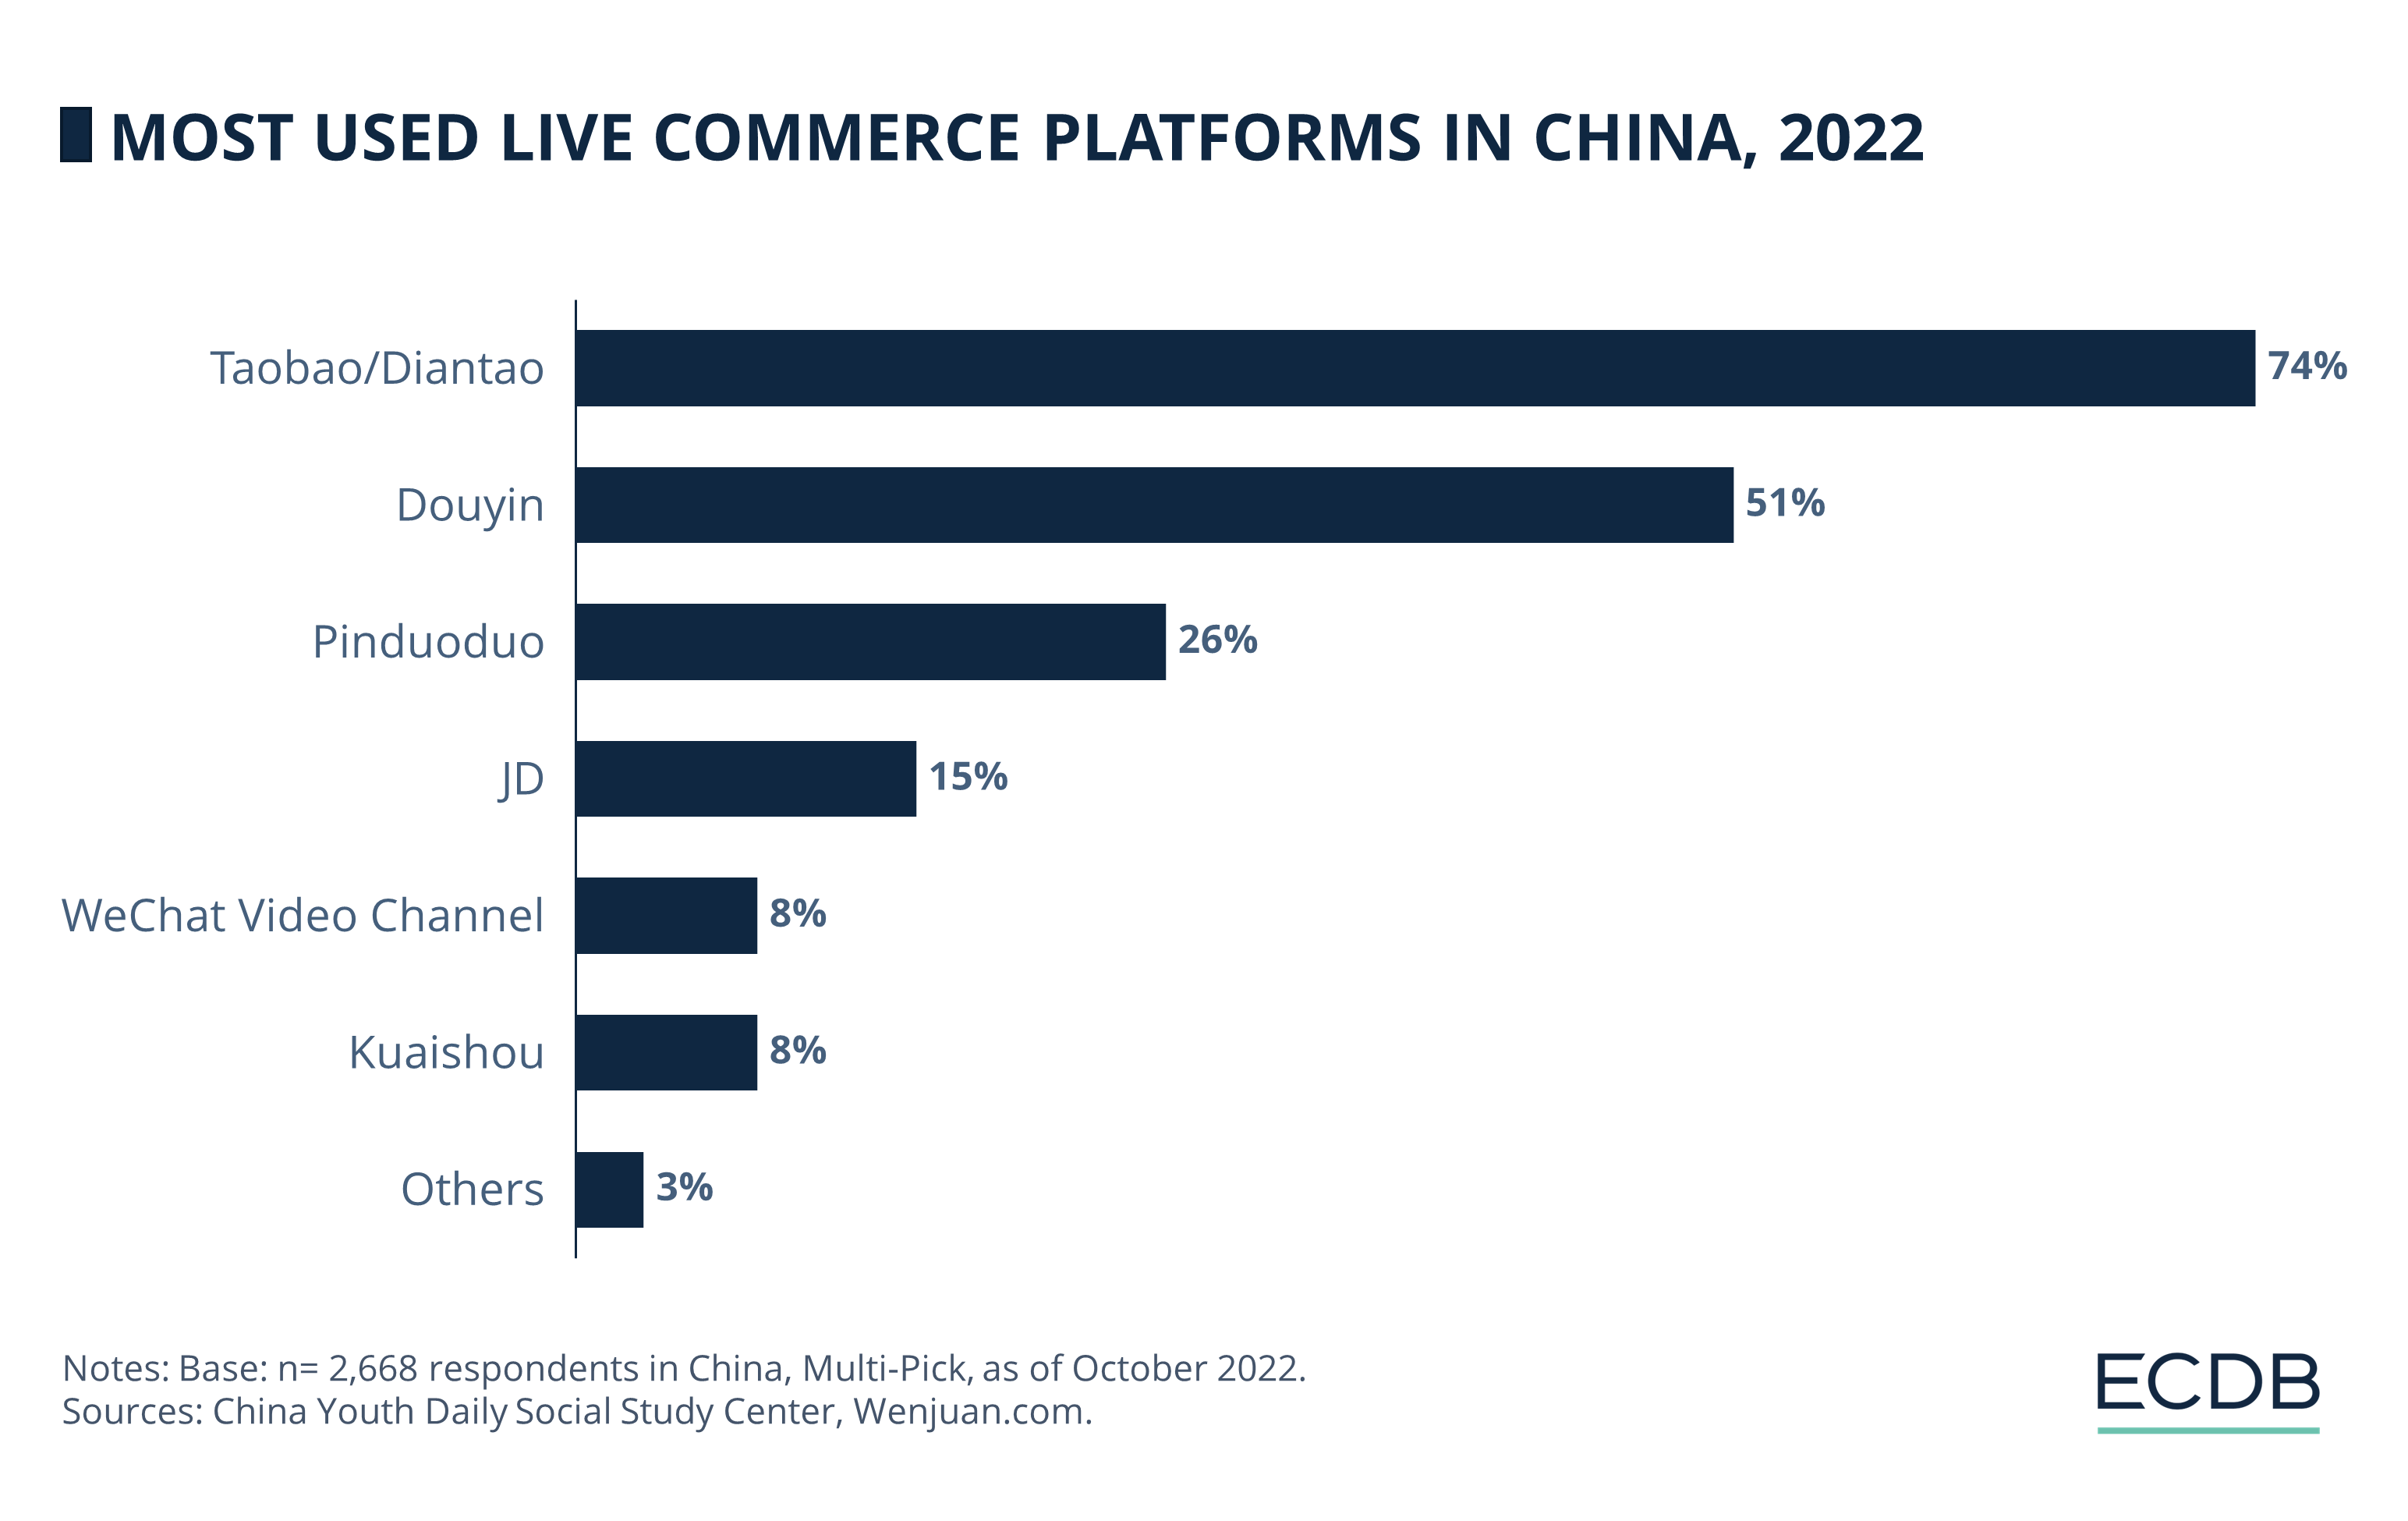 Most Used Live Commerce Platforms in China, 2022